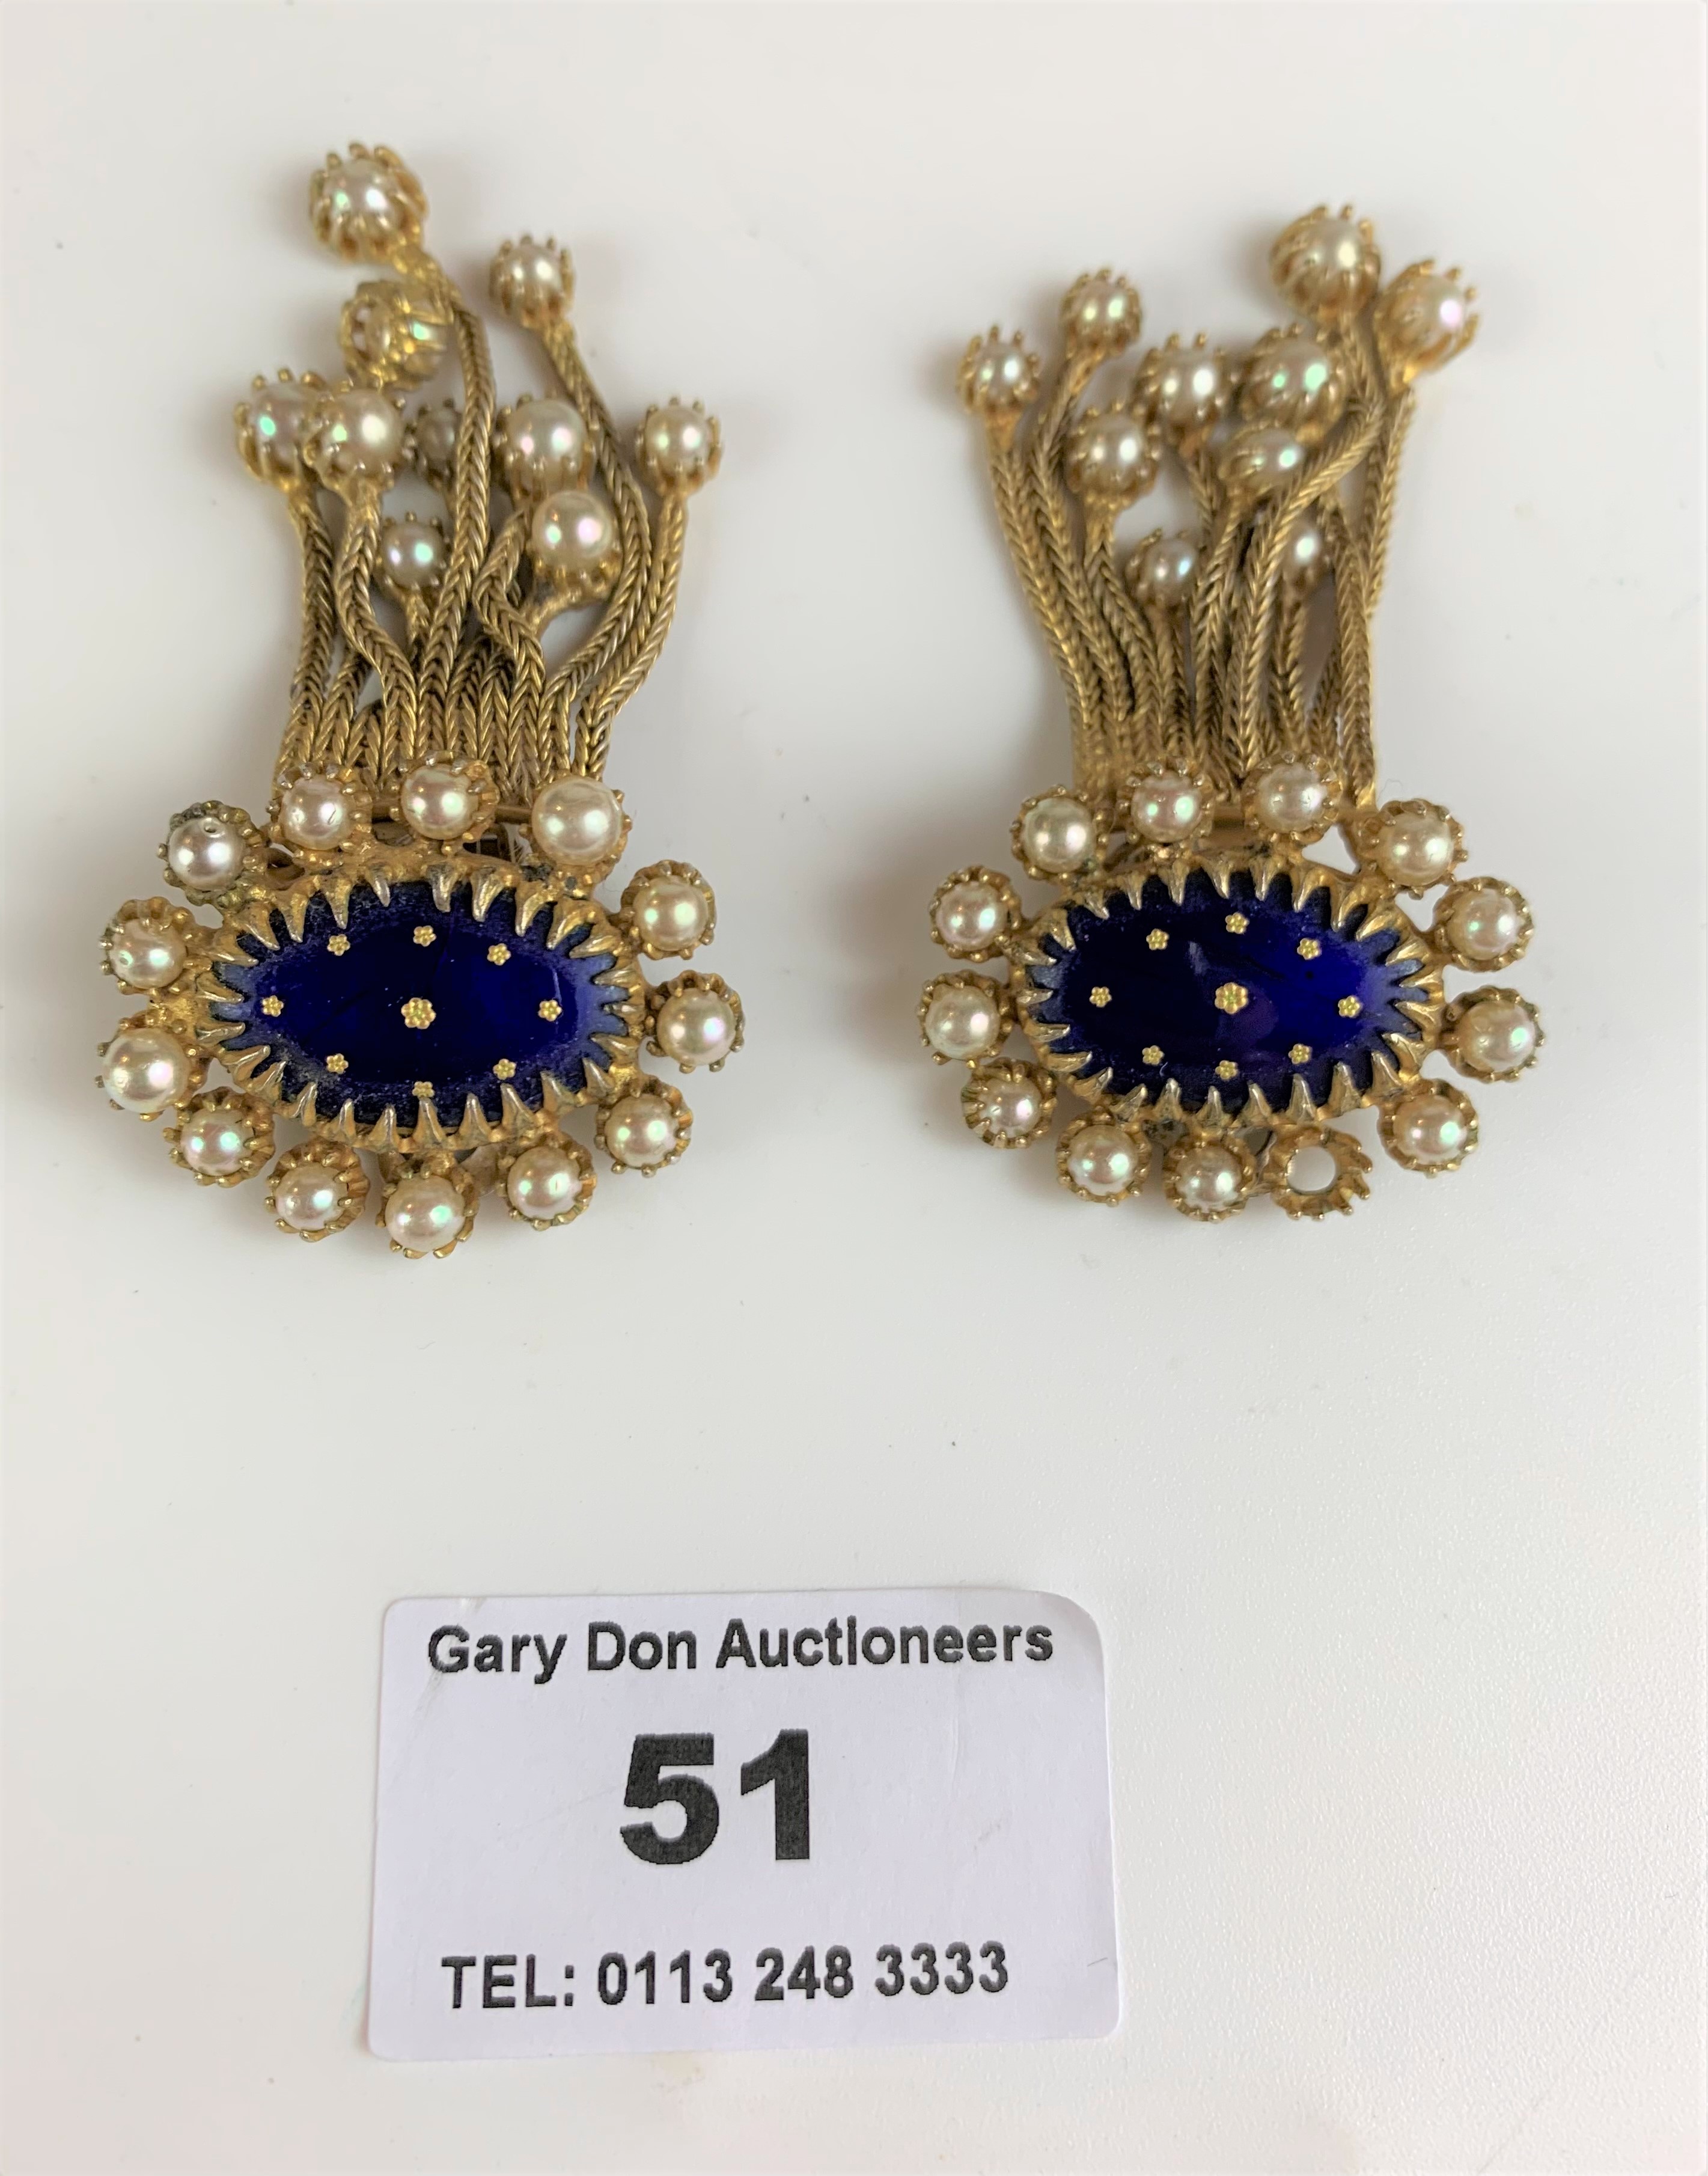 Pair of Christian Dior earrings by Michel Maer (1 pearl missing) - Image 2 of 6